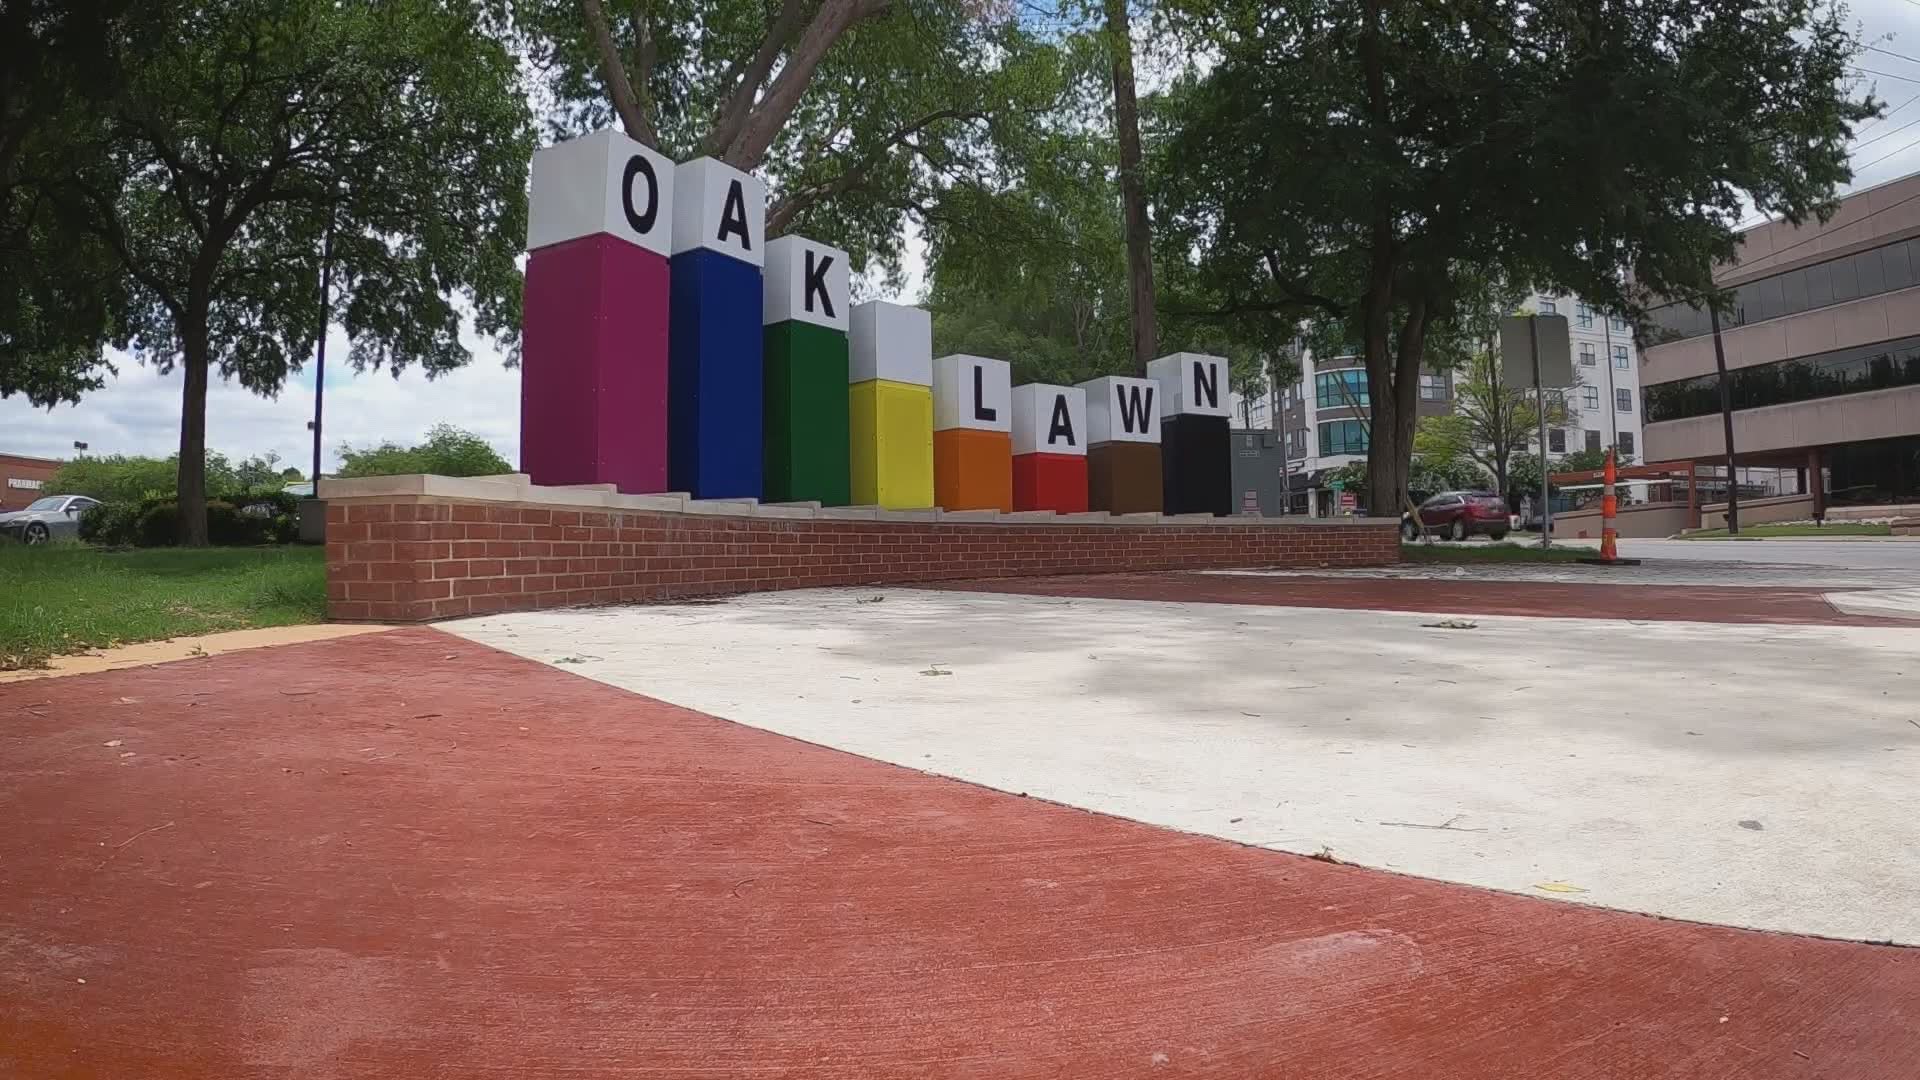 The Oak Lawn neighborhood became the center for the North Texas LGBTQ community in the early 70s, and it's grown more popular ever since.